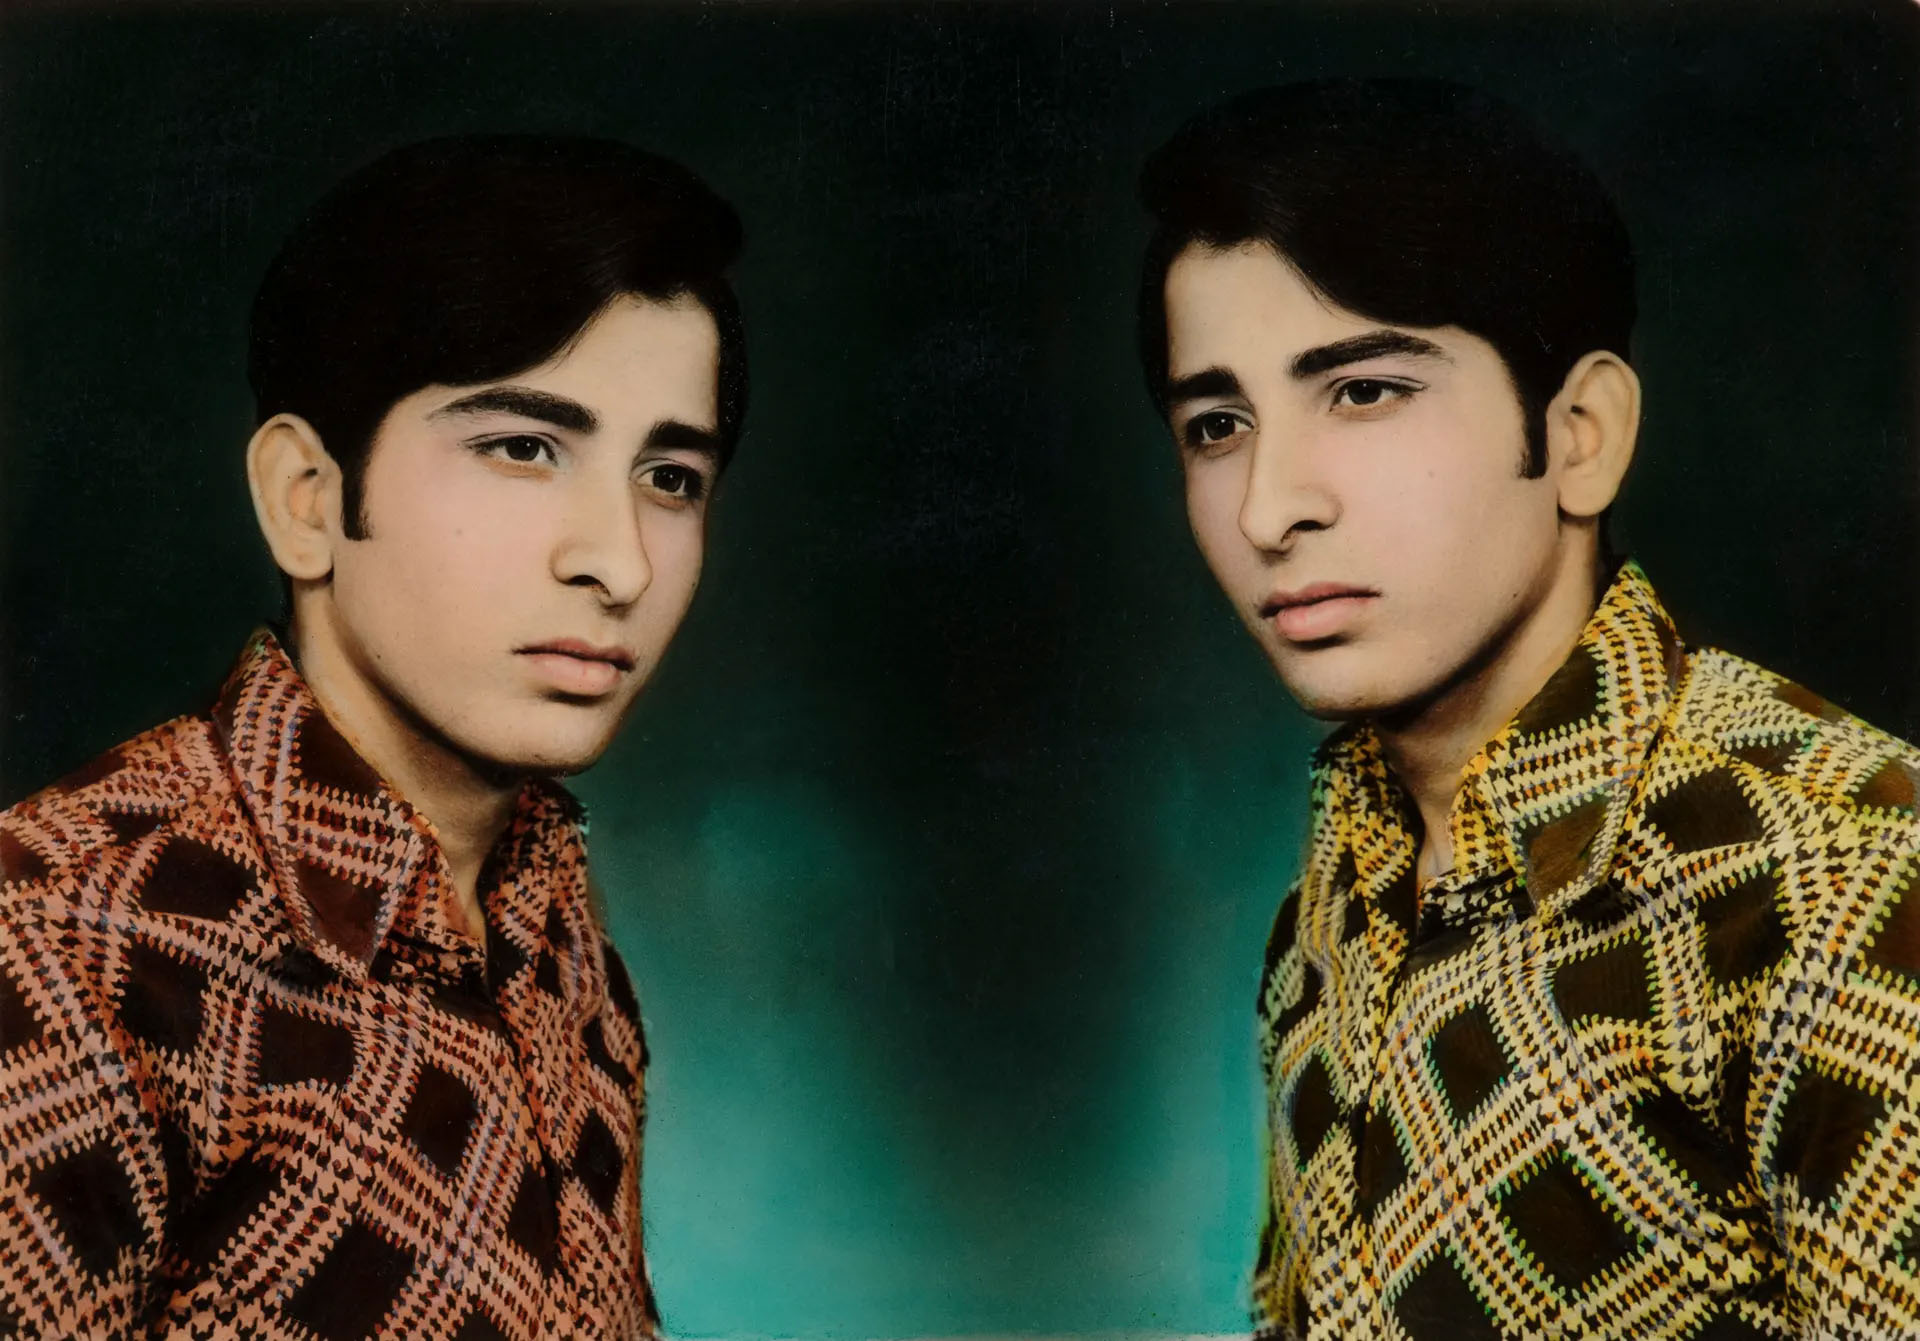 Ram Chand: Two Men and Mirror Portrait, 1970s